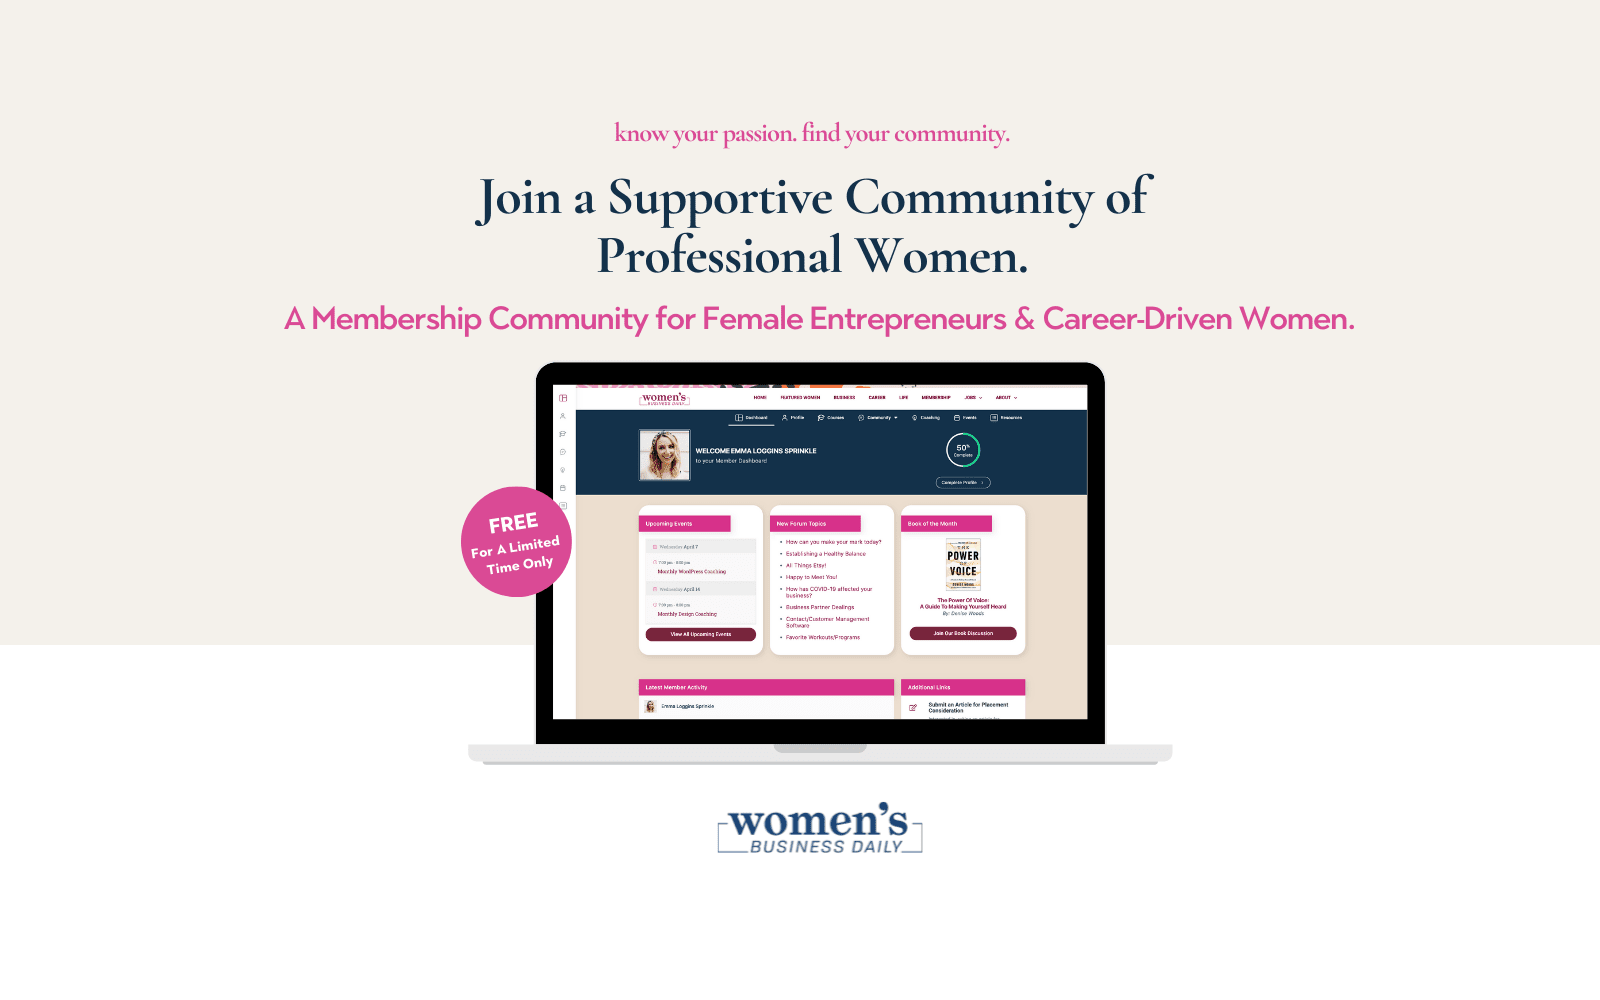 Join A Supportive Community of Professional Women